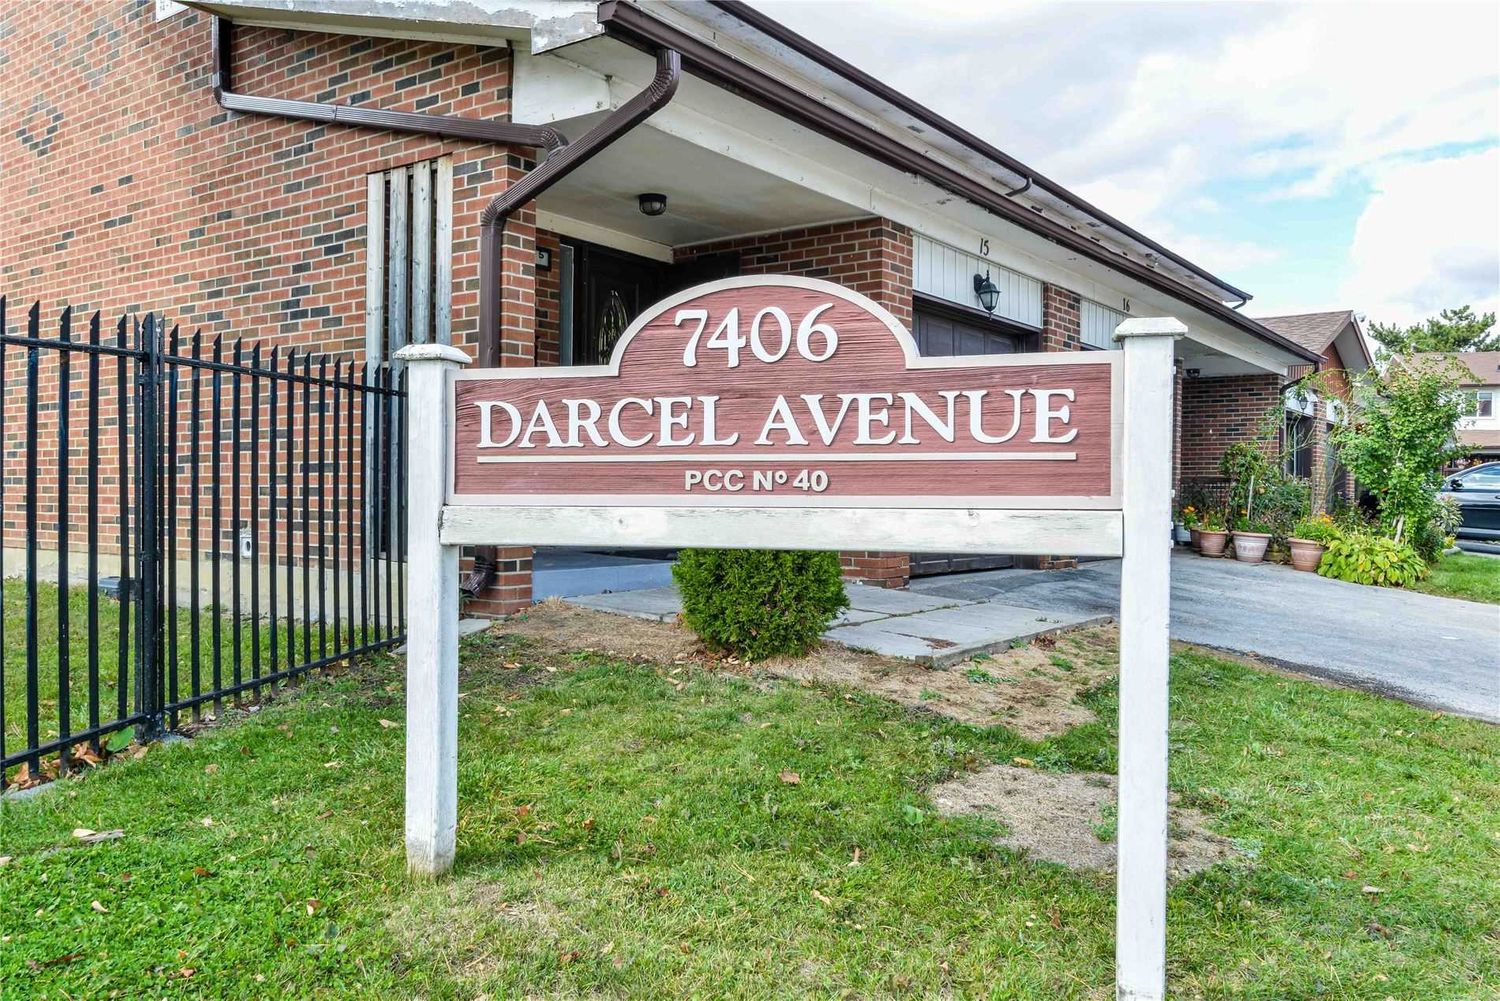 7406 Darcel Avenue. 7406 Darcel Avenue Townhomes is located in  Mississauga, Toronto - image #1 of 3